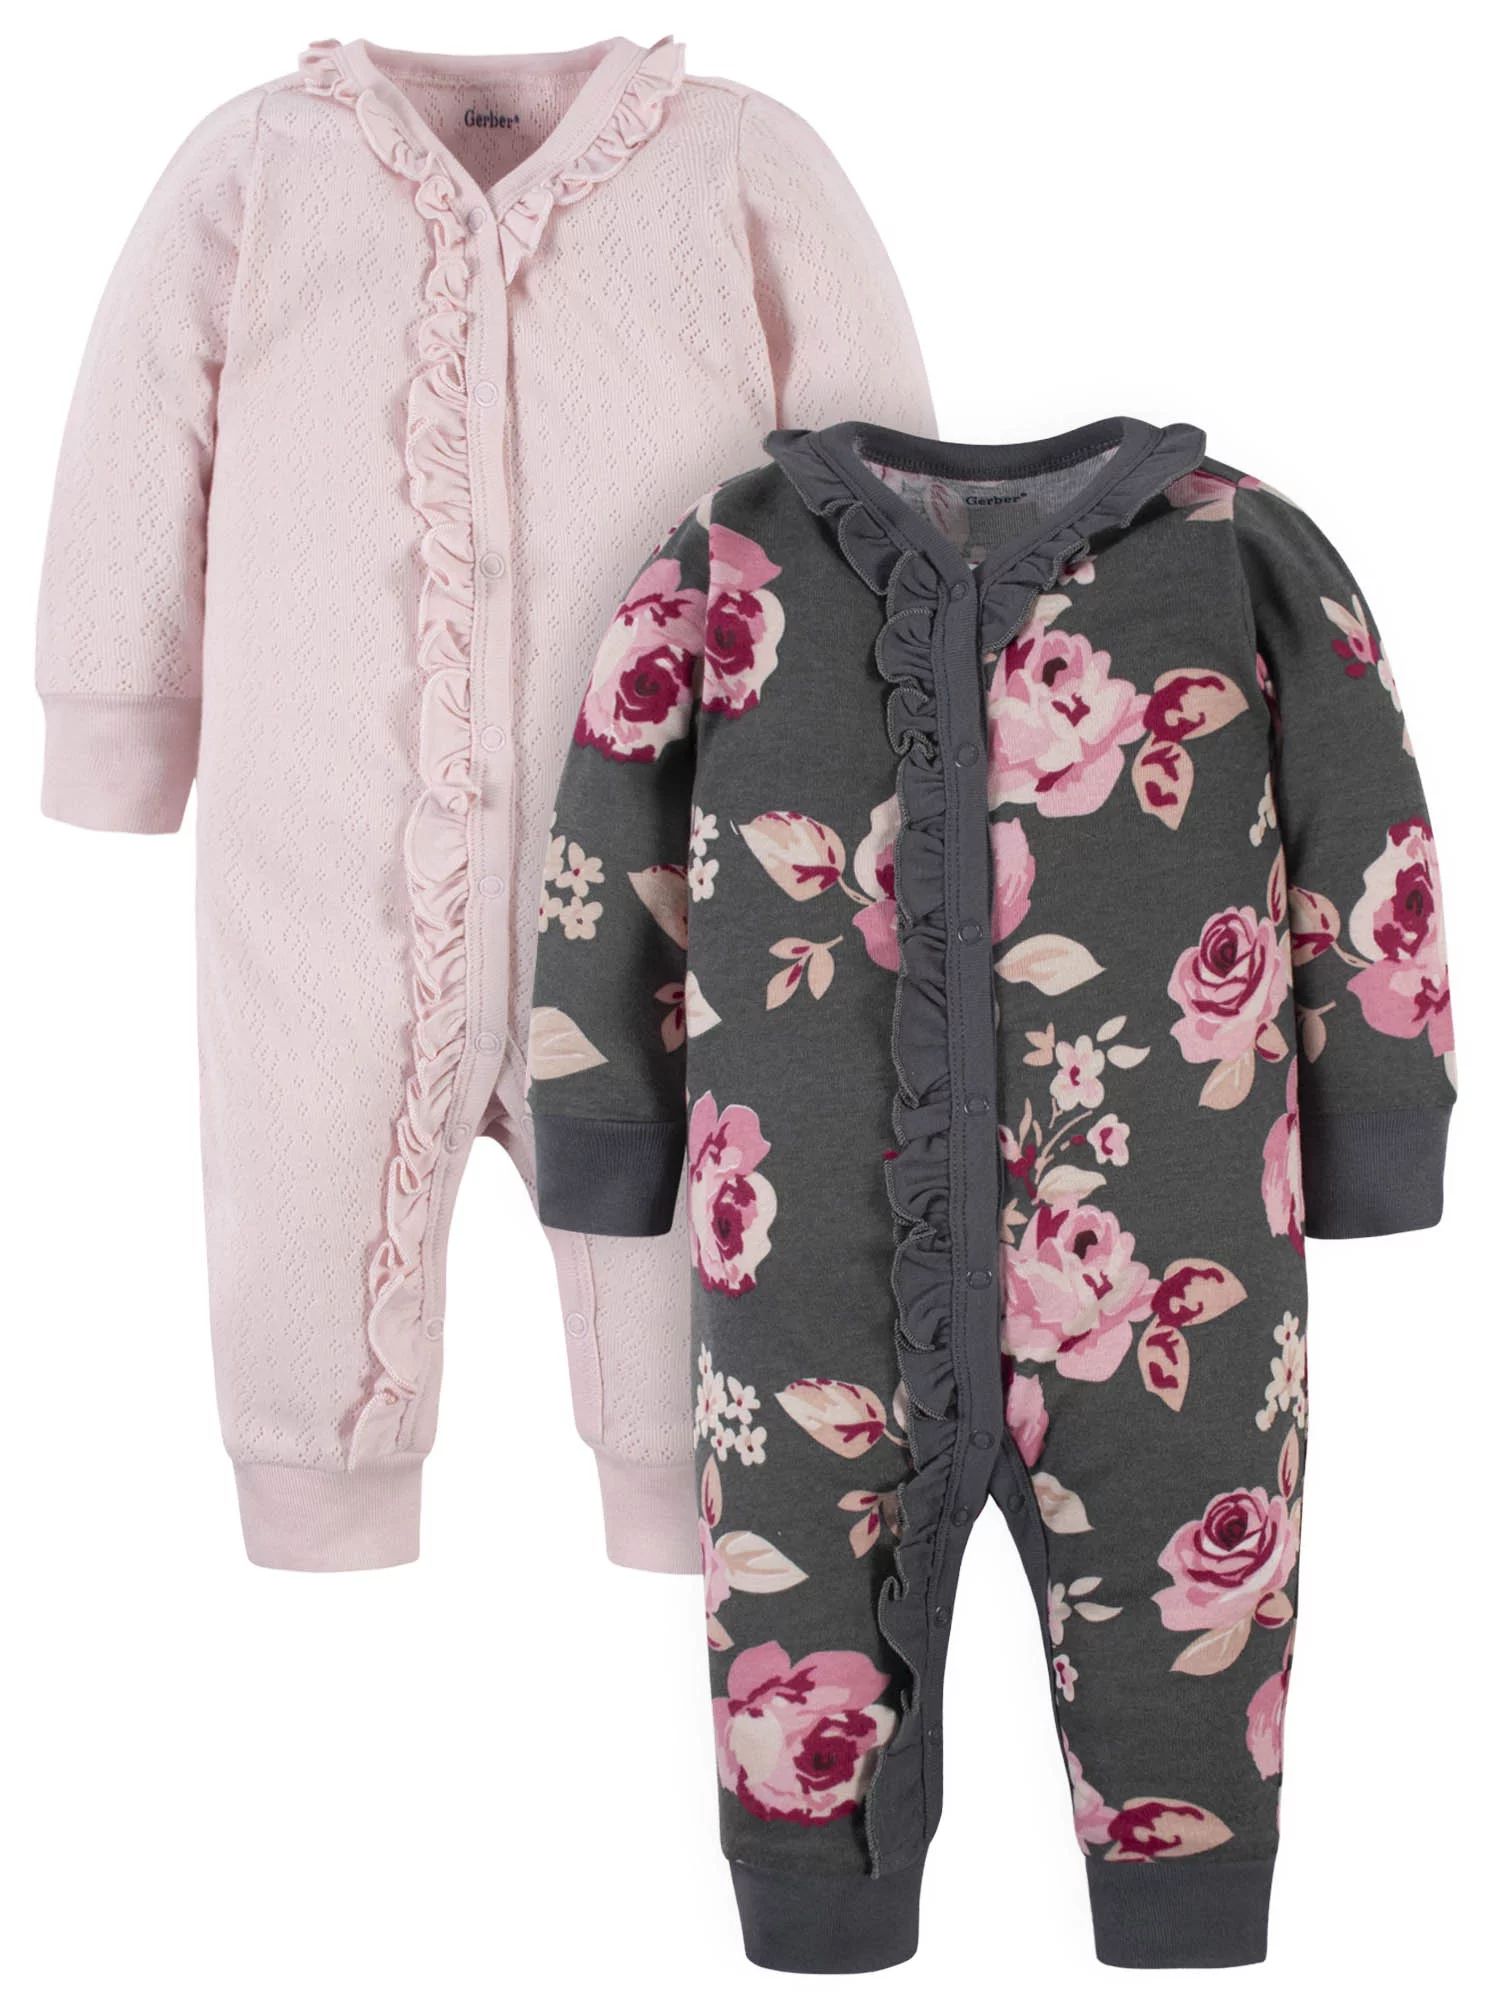 Modern Moments by Gerber Baby Girl Coveralls, 2 Pack (Newborn-12 M) | Walmart (US)